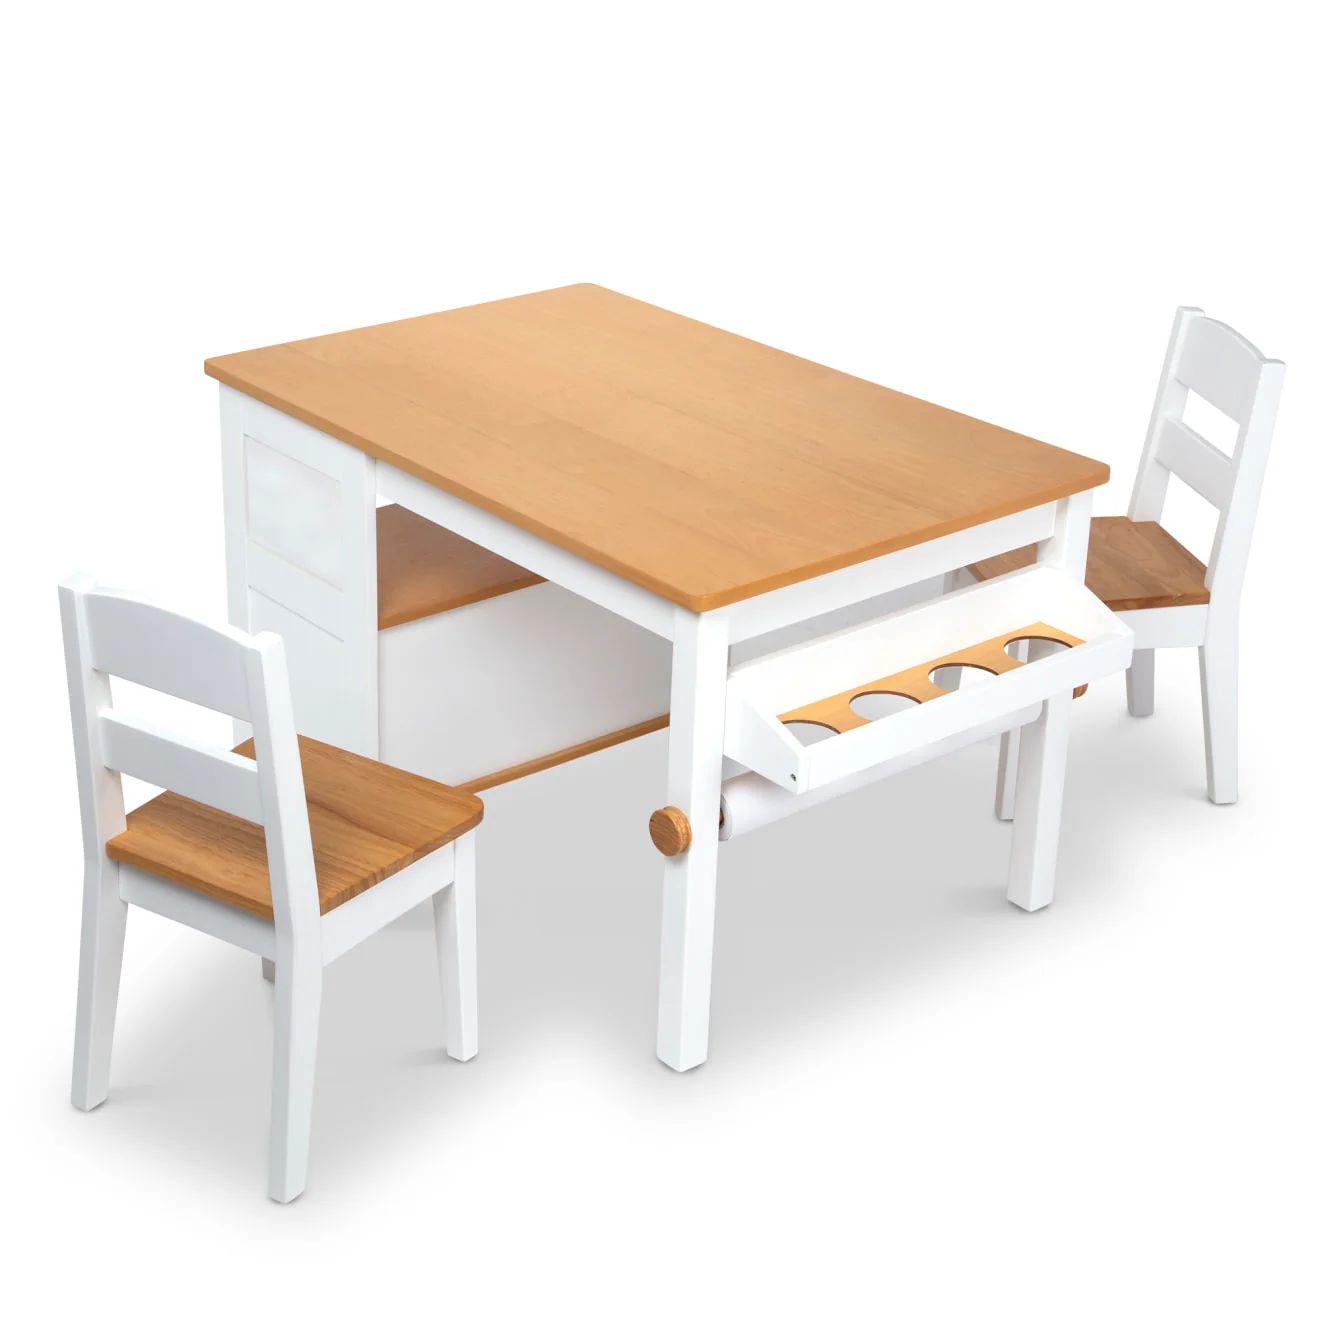 Wooden Art Table & Chairs Set | Melissa and Doug